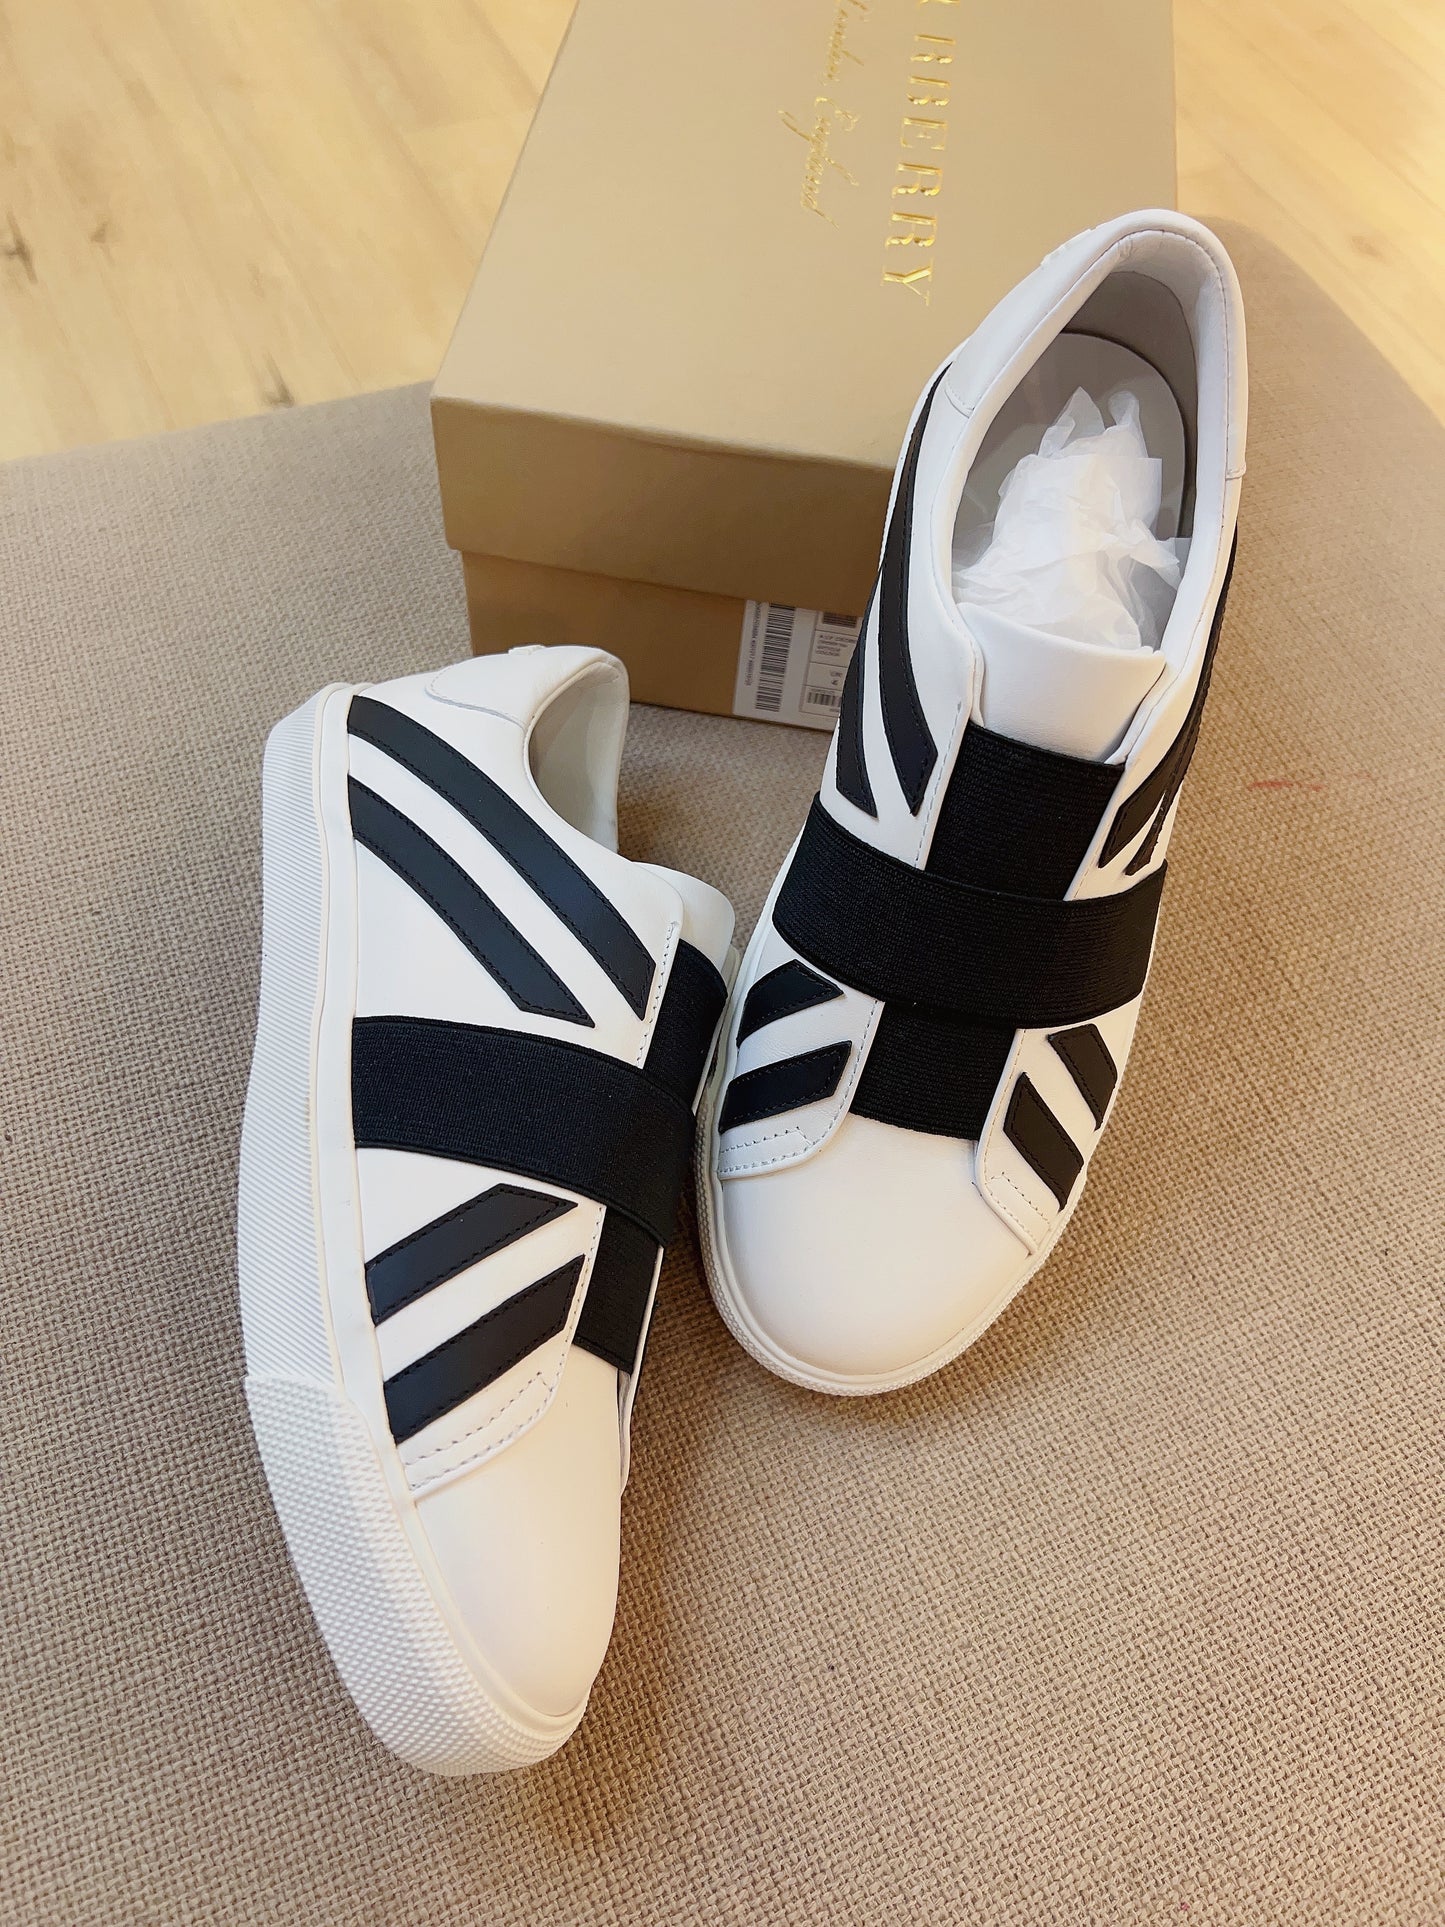 Burberry Sneaker Size37 New